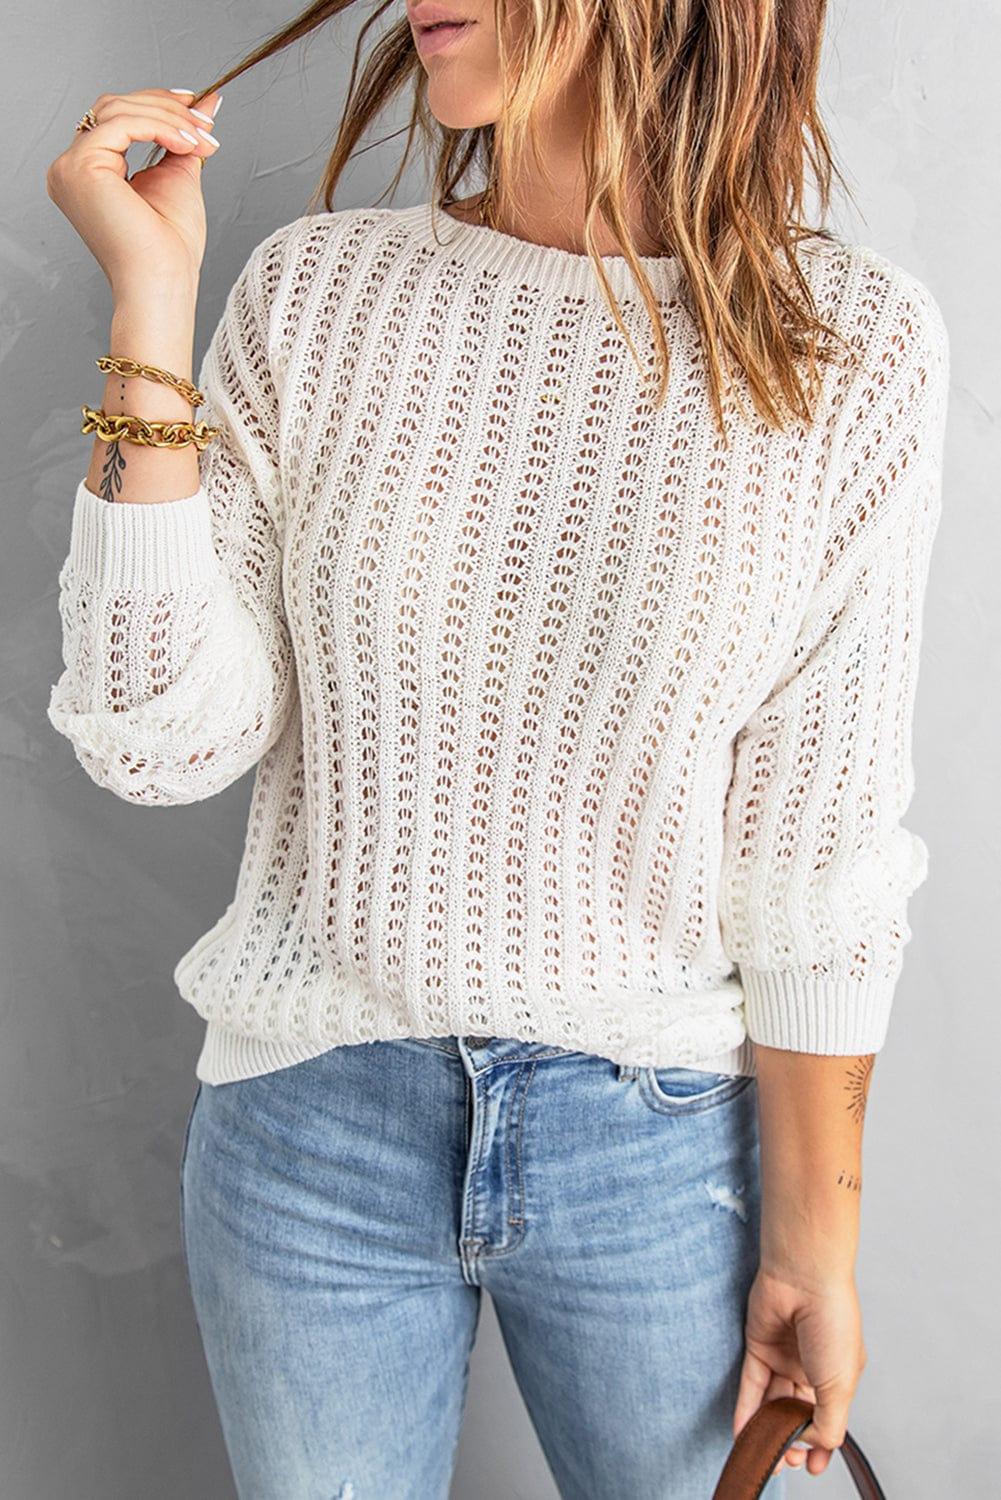 SAVLUXE Shirts & Tops Lady's Dropped Shoulder Openwork Sweater